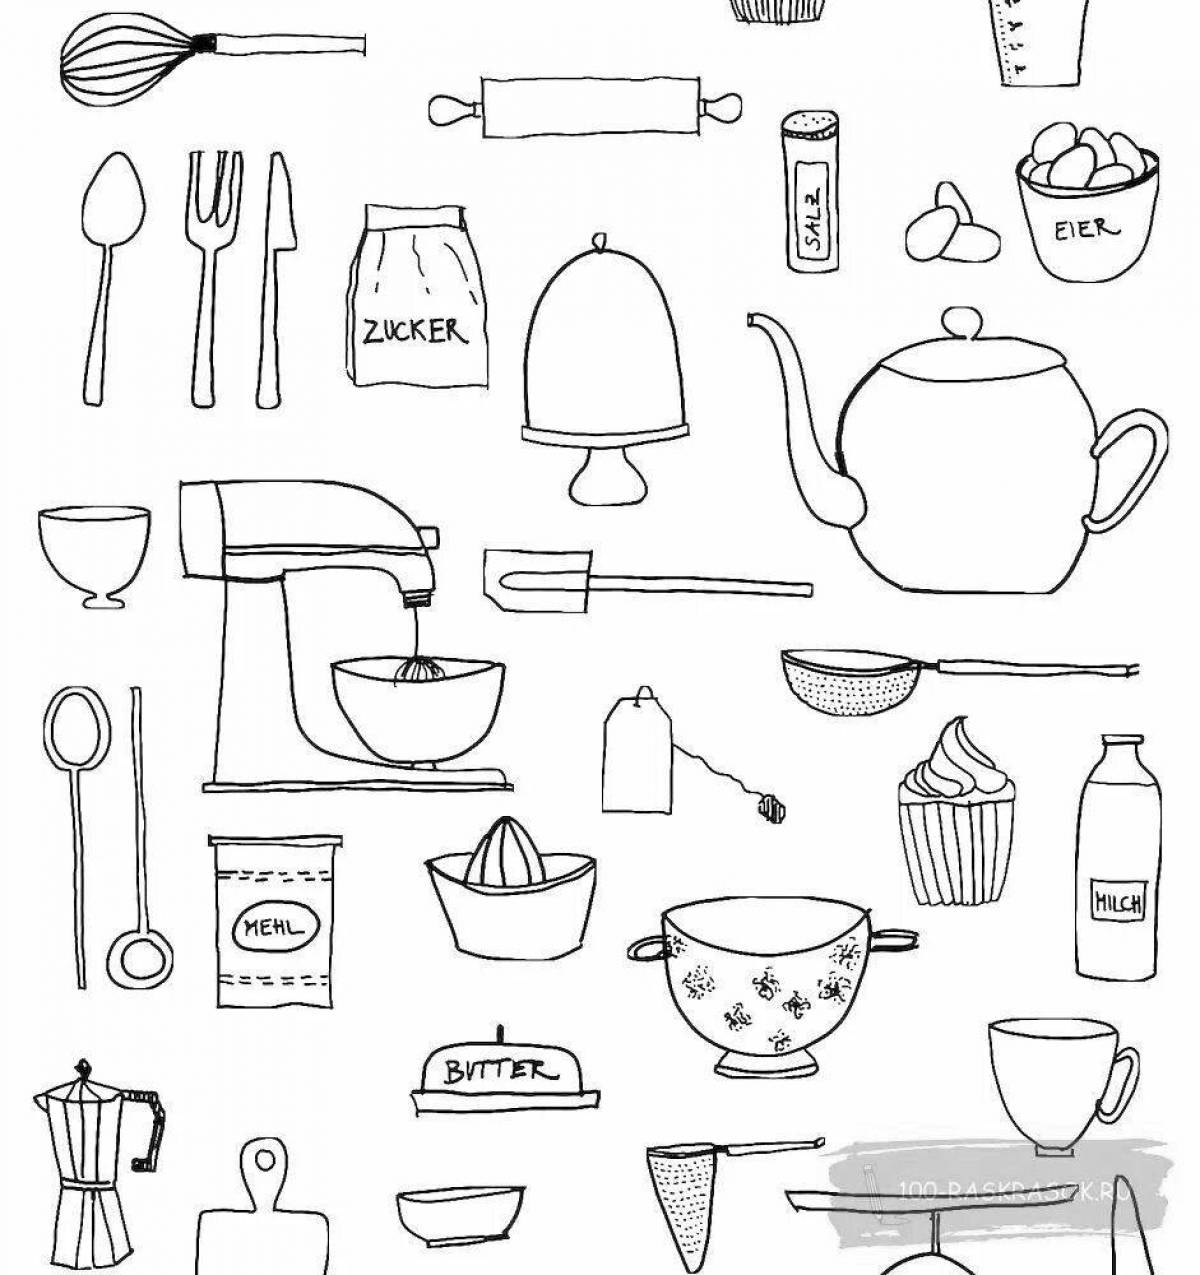 Great kitchen utensils coloring page for kids